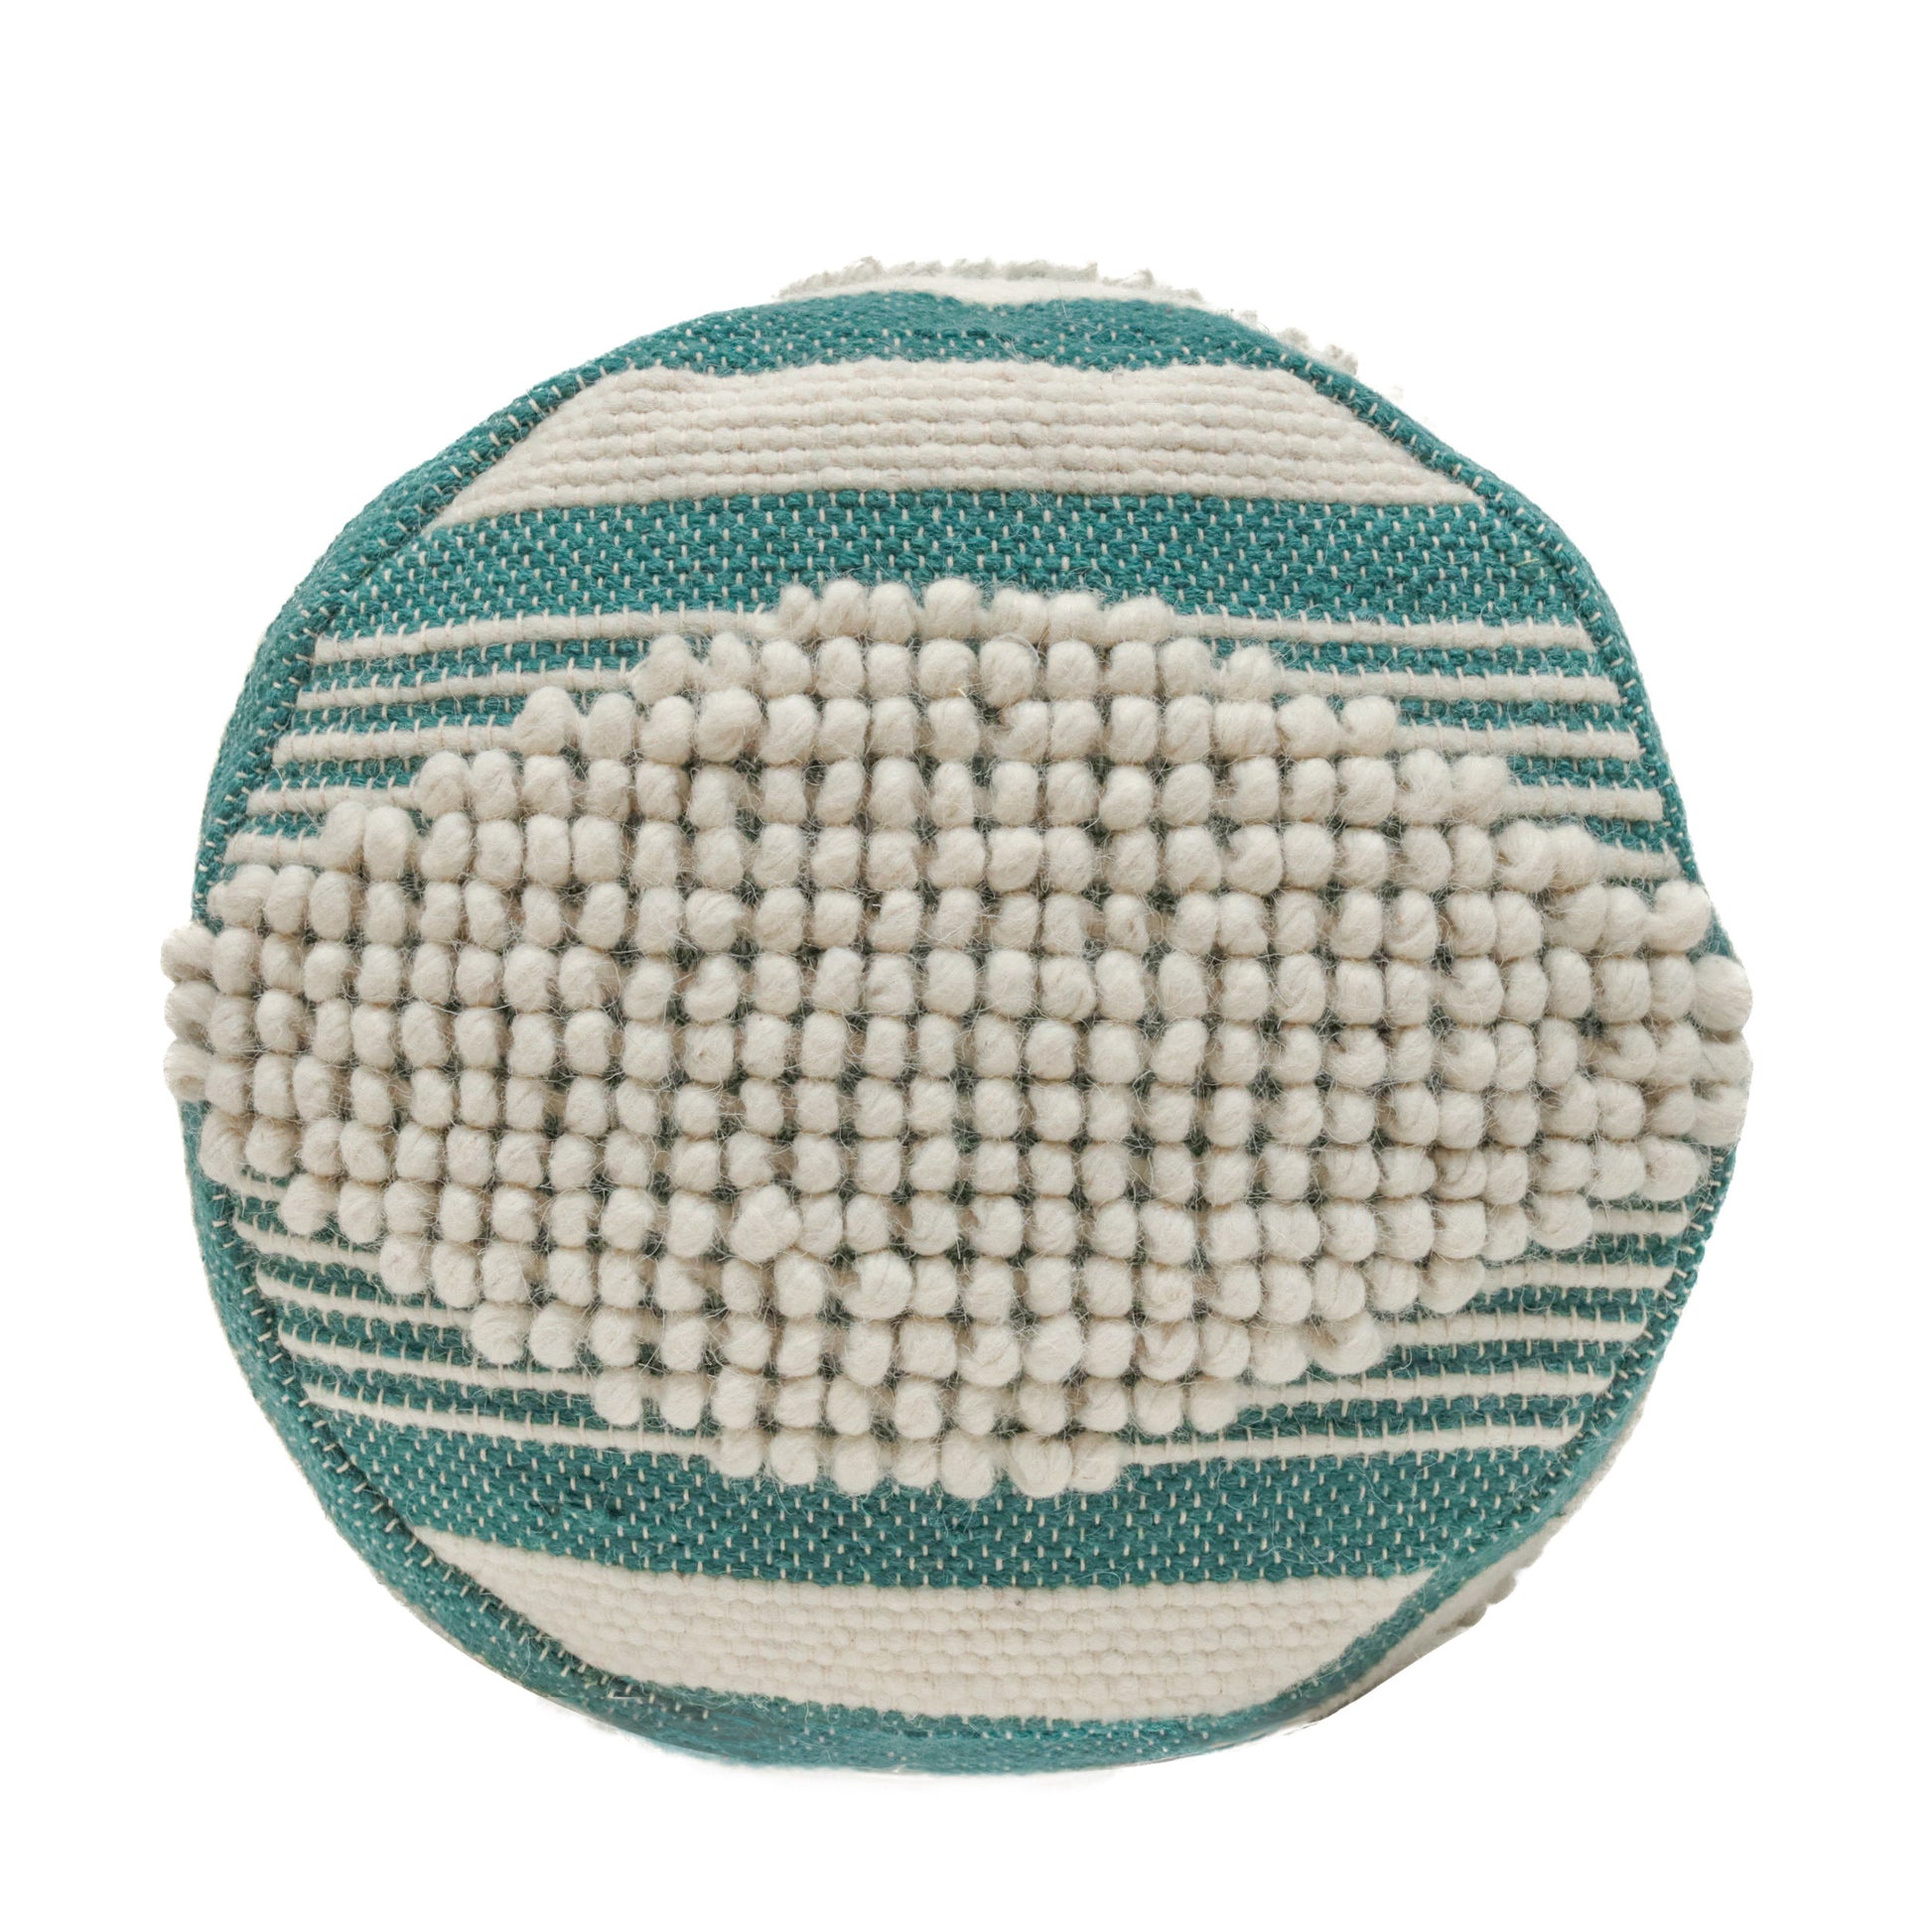 Diamond Handcrafted Fabric Cylindrical Pouf, White and teal-fabric